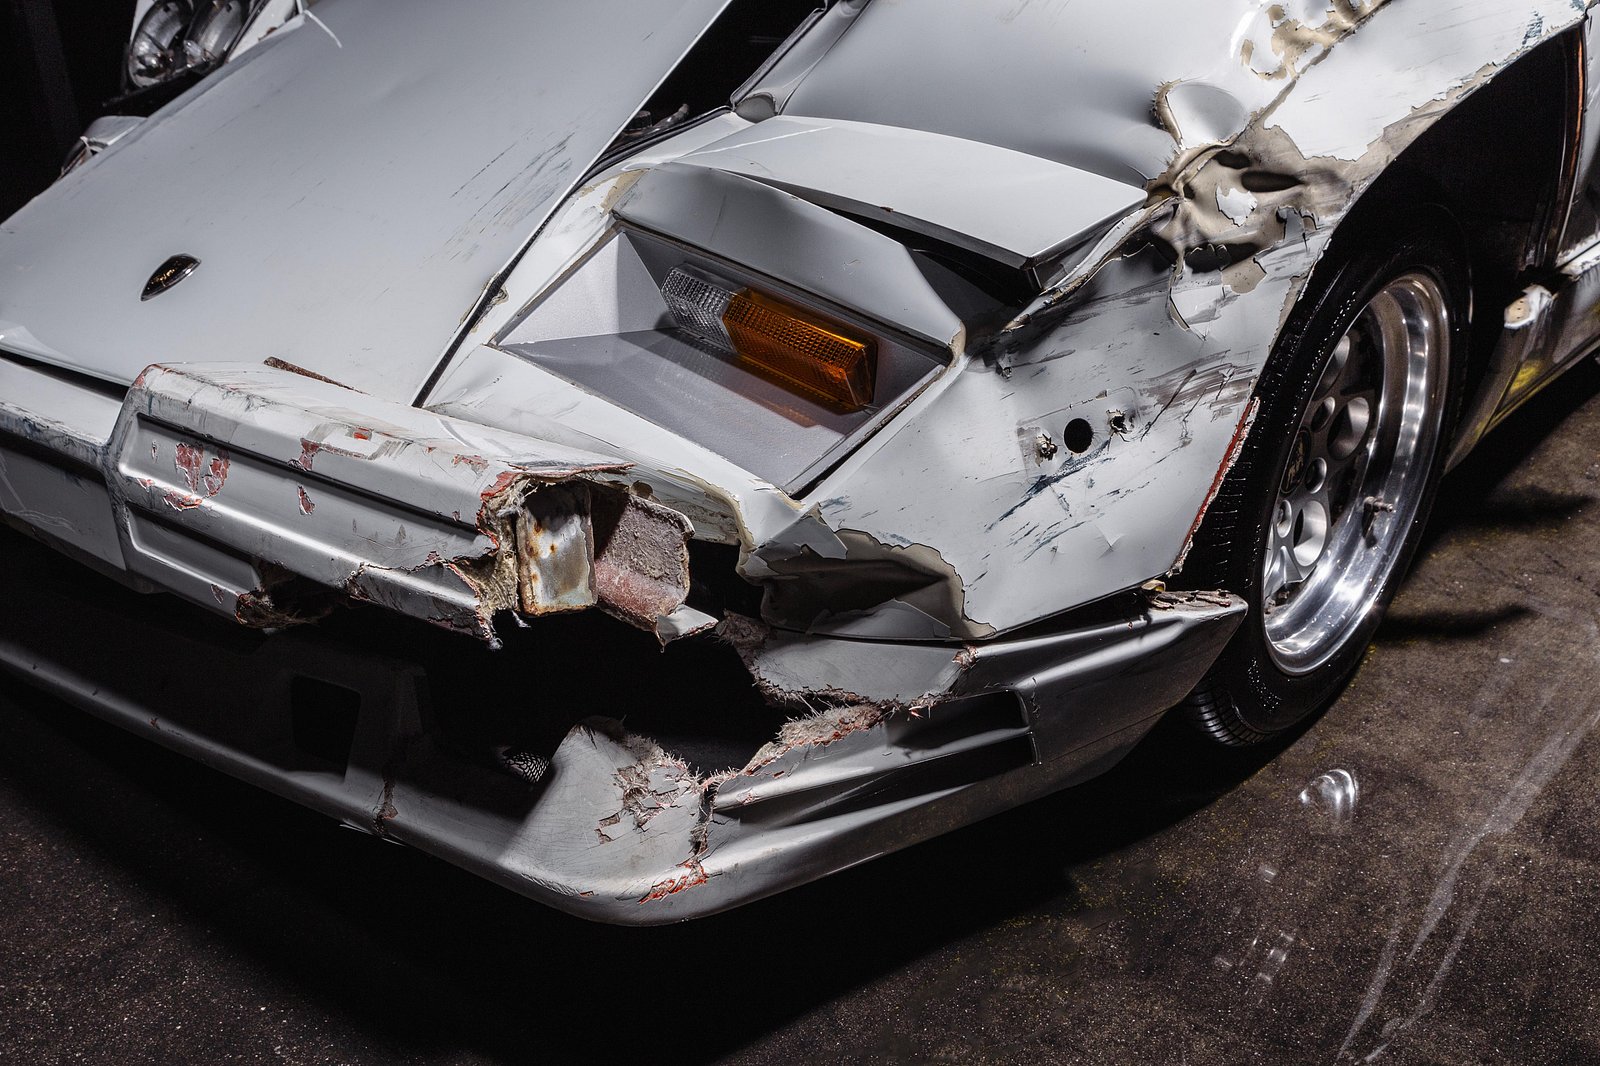 For Sale: The Wrecked Lamborghini Countach From The Wolf of Wall Street